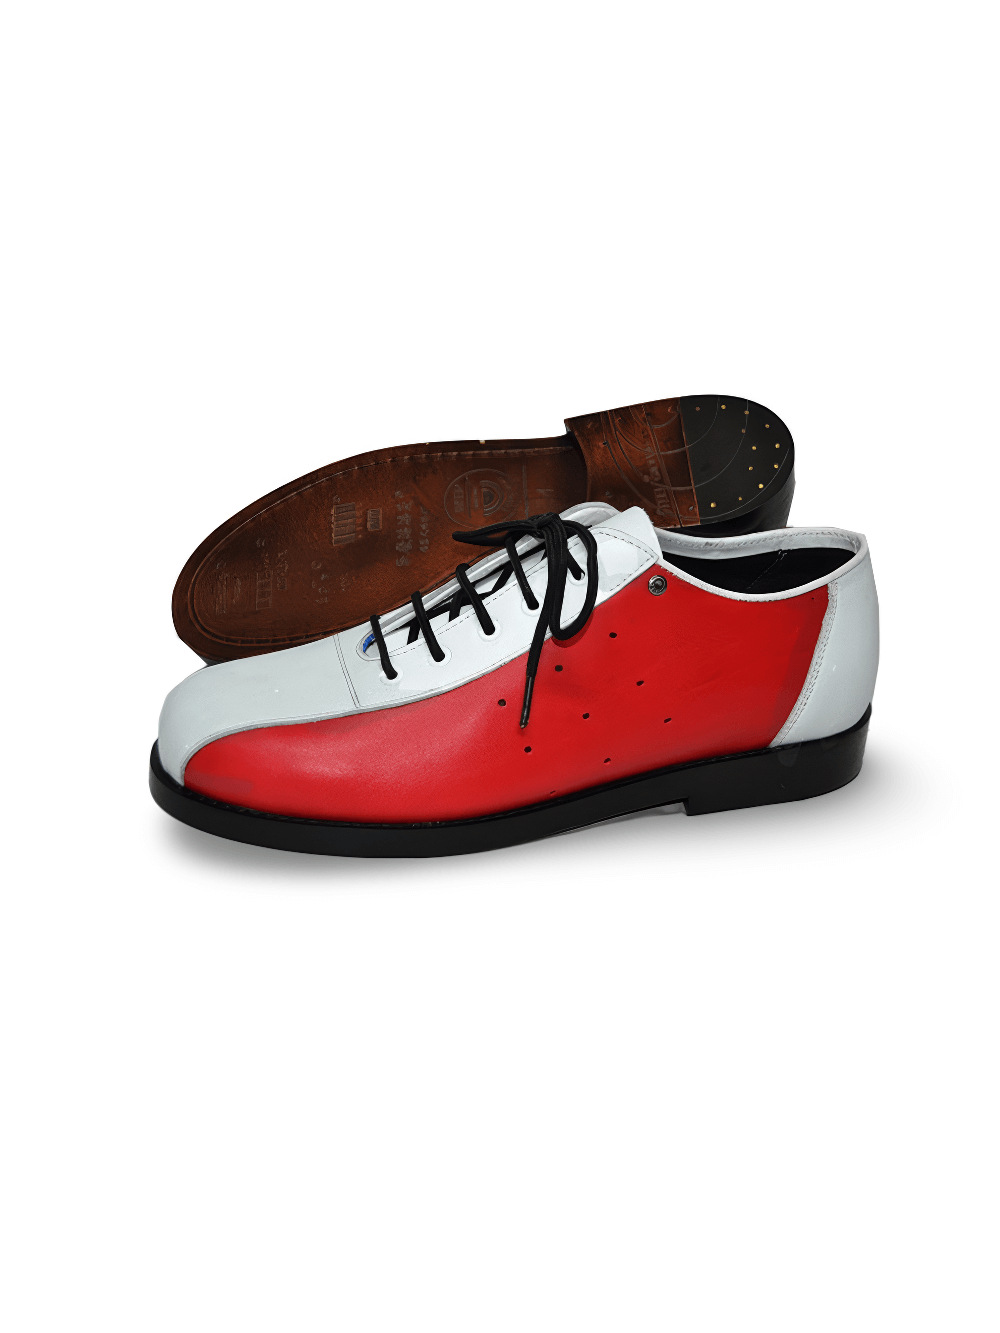 Unisex White and Red Grained Leather Bowling Shoes